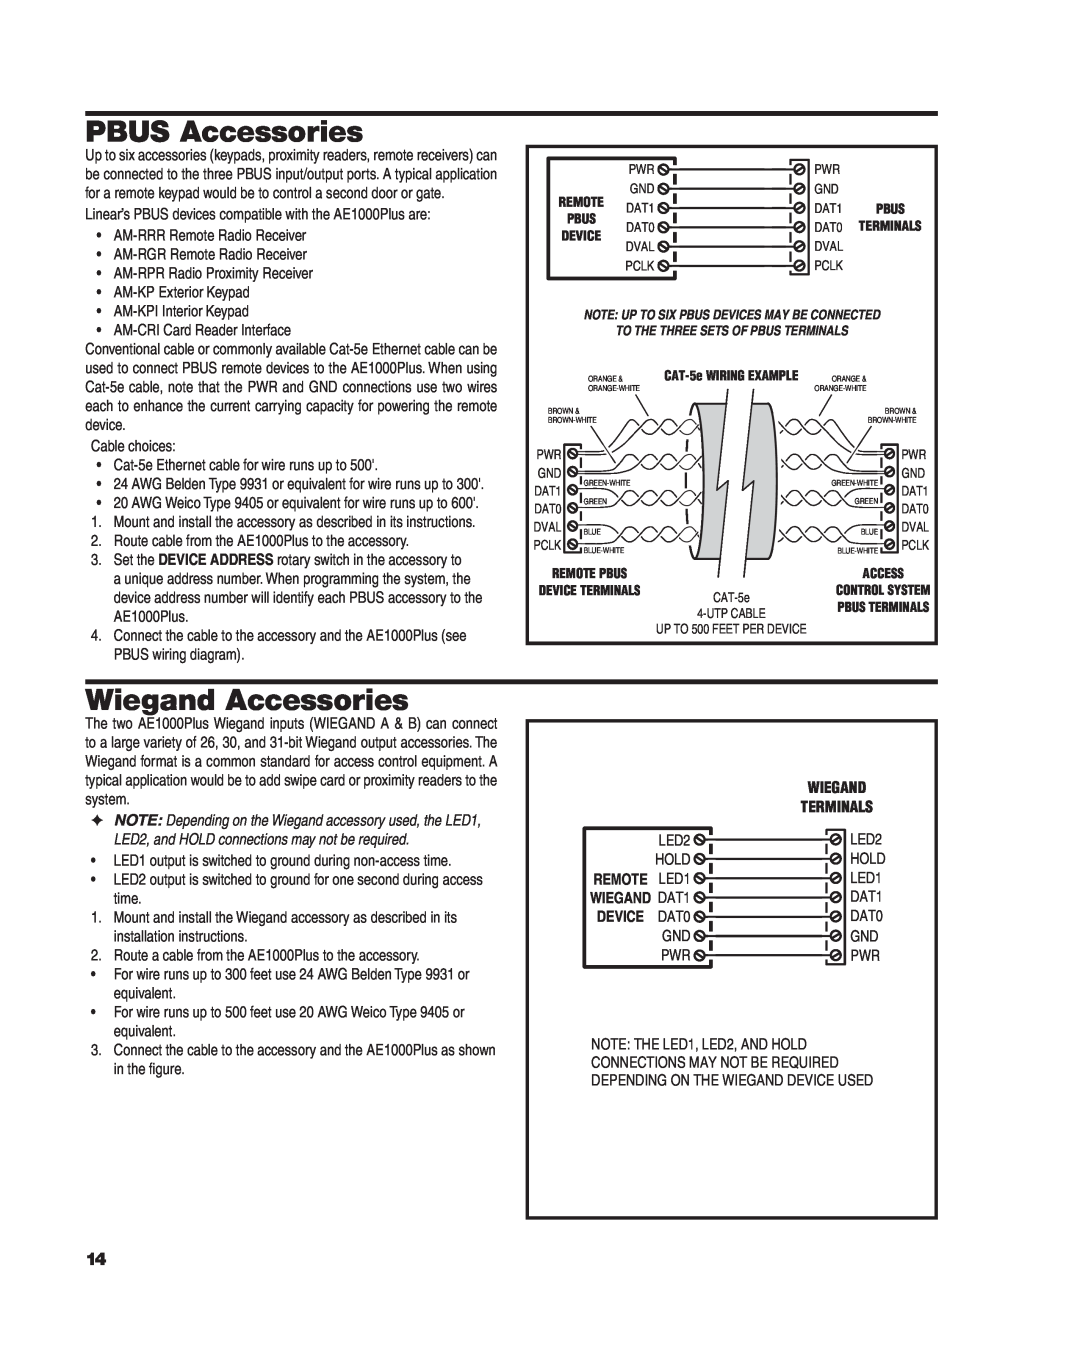 Linear AE1000Plus installation instructions PBUS Accessories, Wiegand Accessories, Wiegand Terminals 